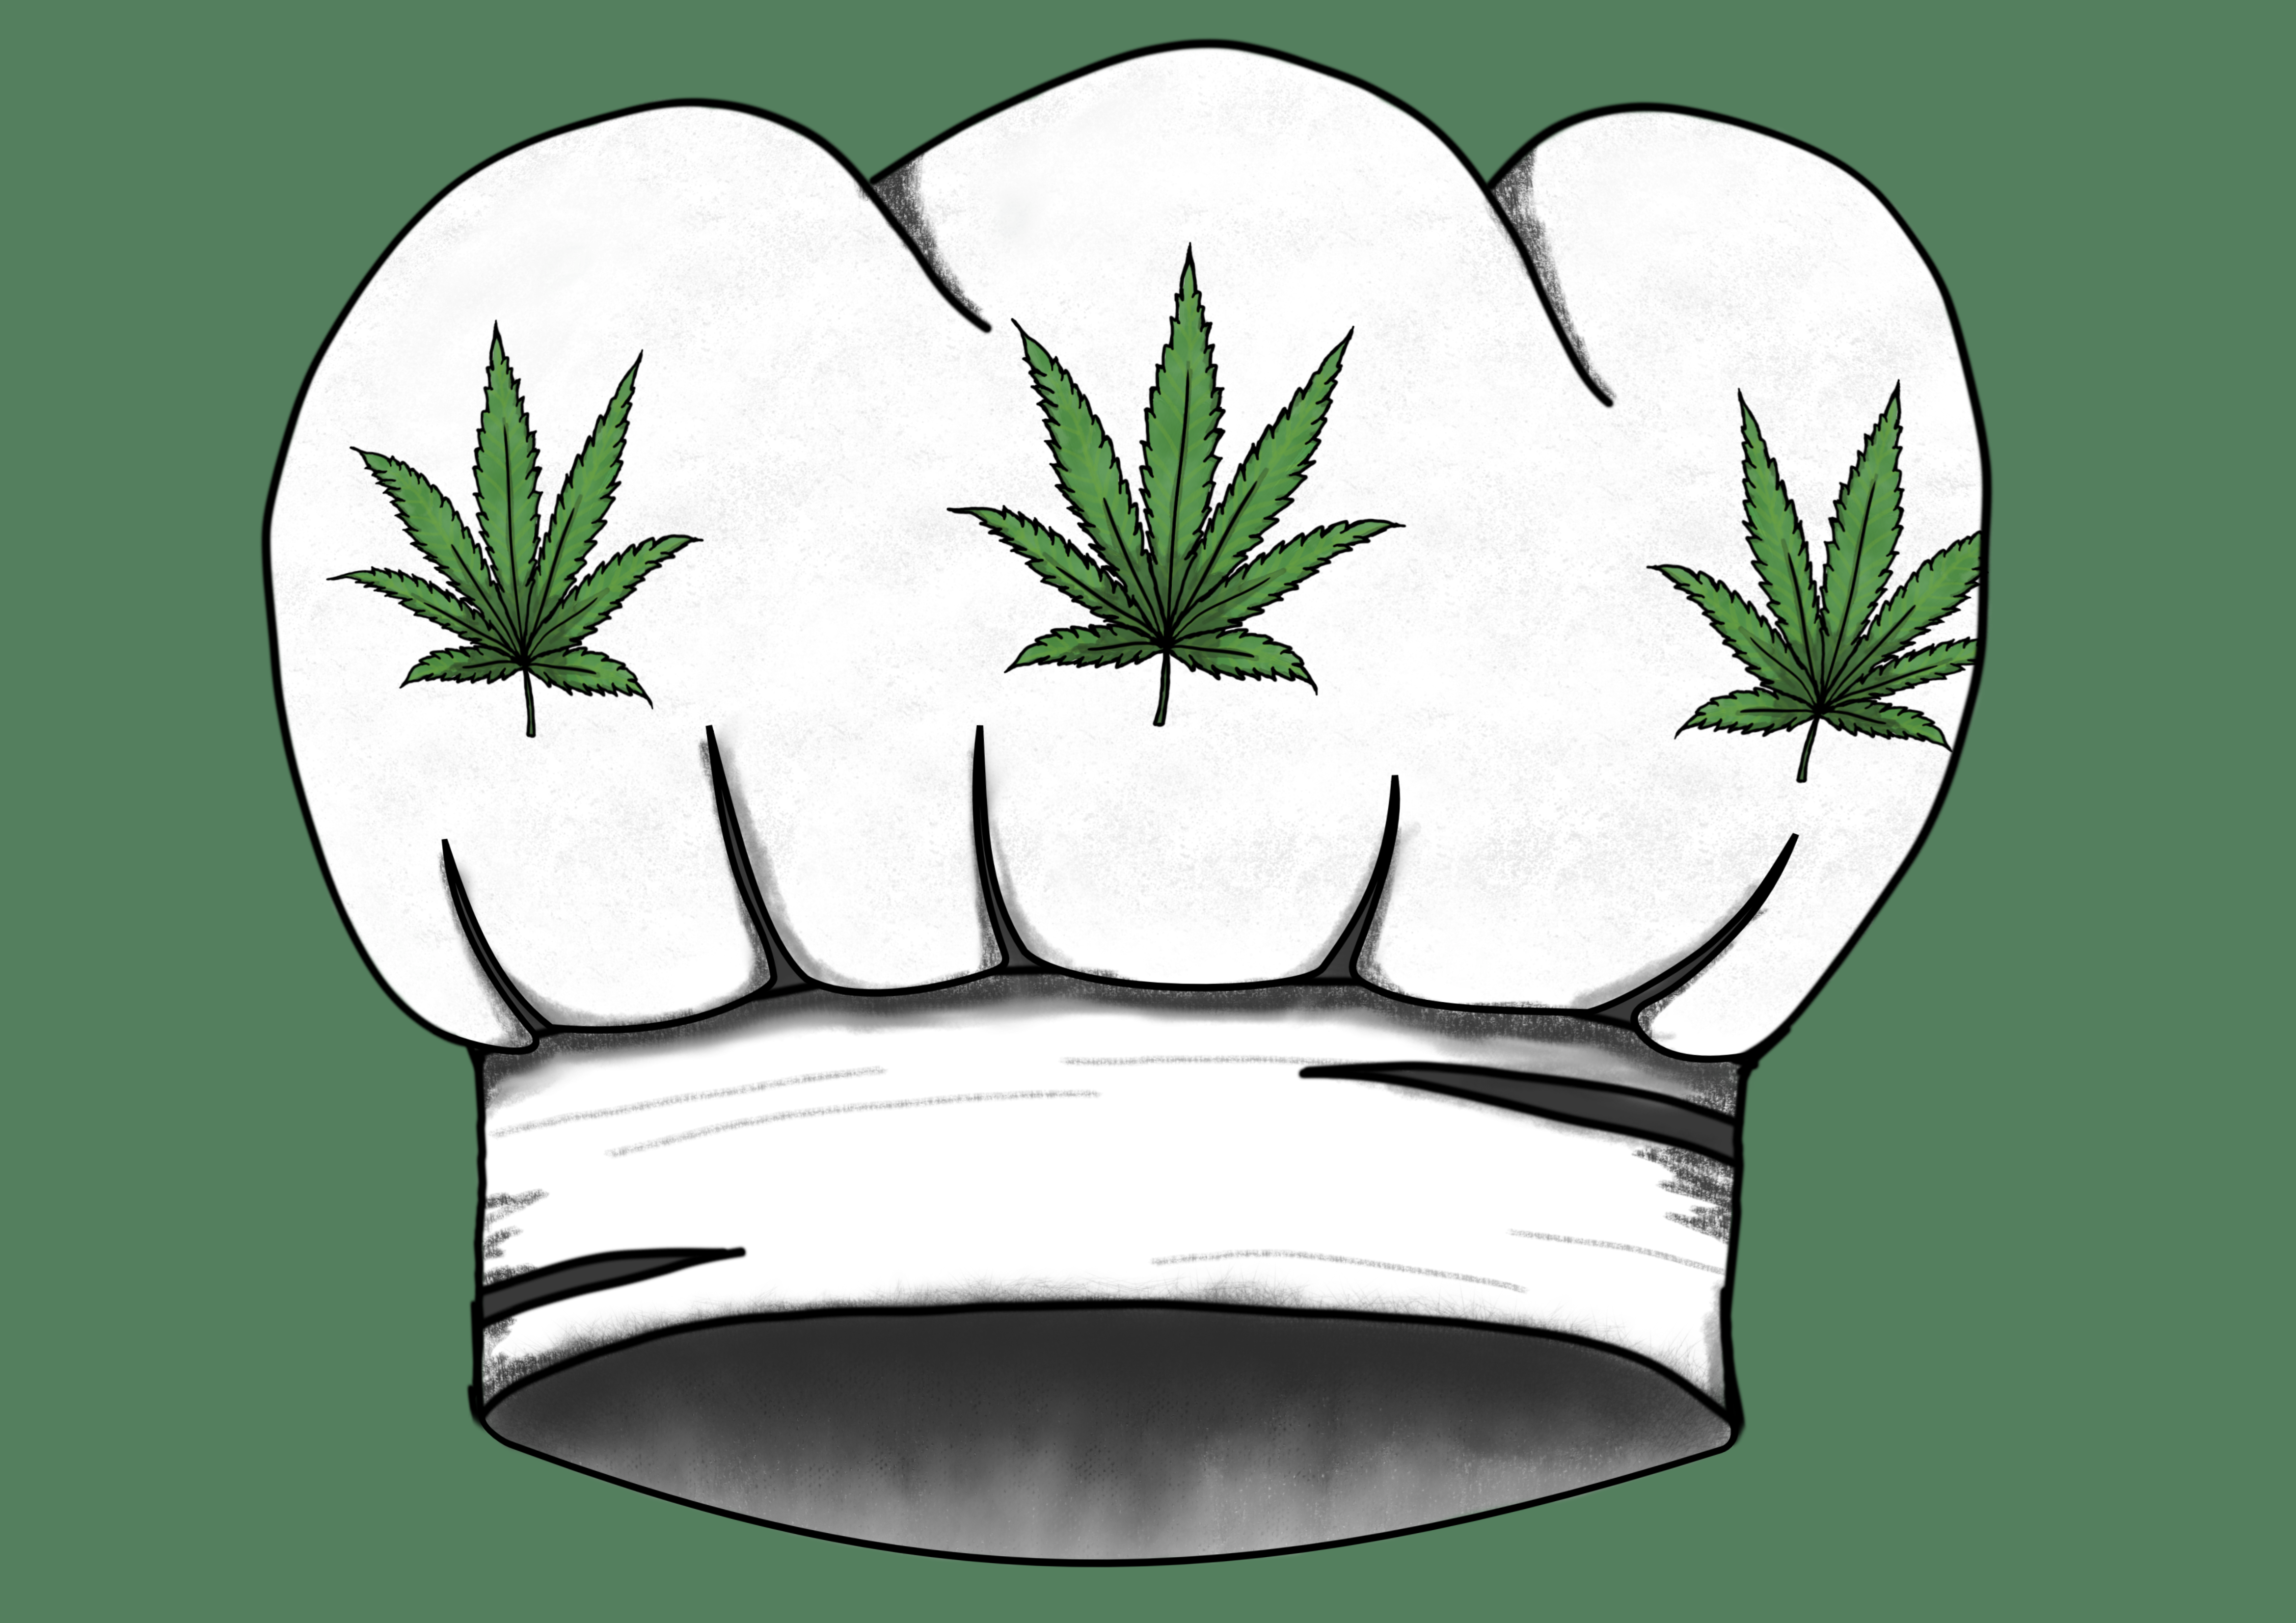 4/20 foods for toker tummies - The Rocky Mountain Collegian